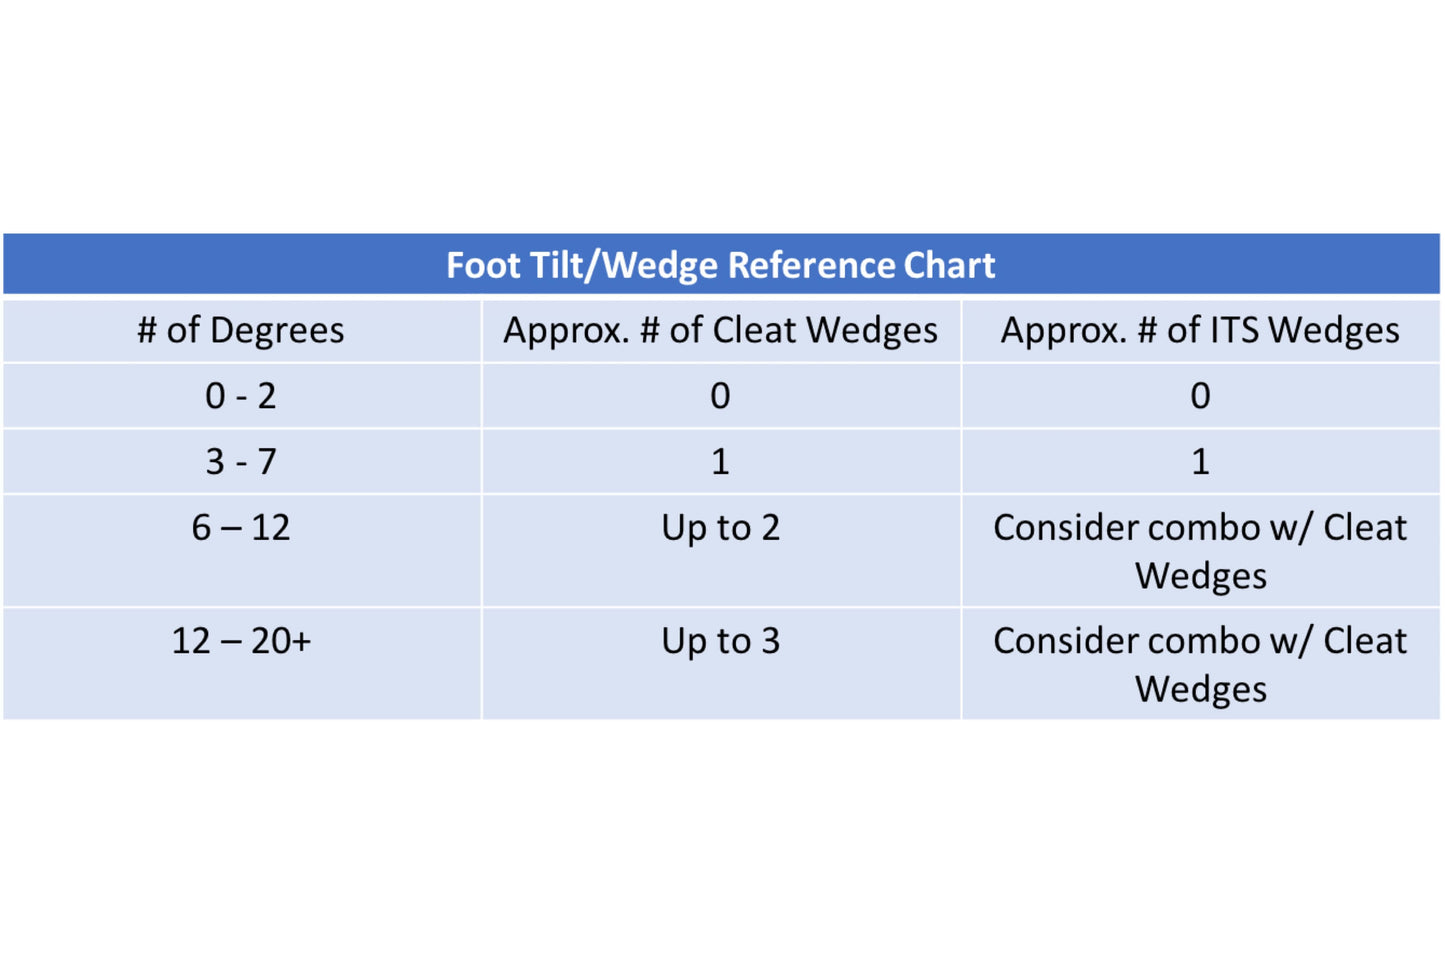 BikeFit Foot Tilt and Wedge Reference Chart